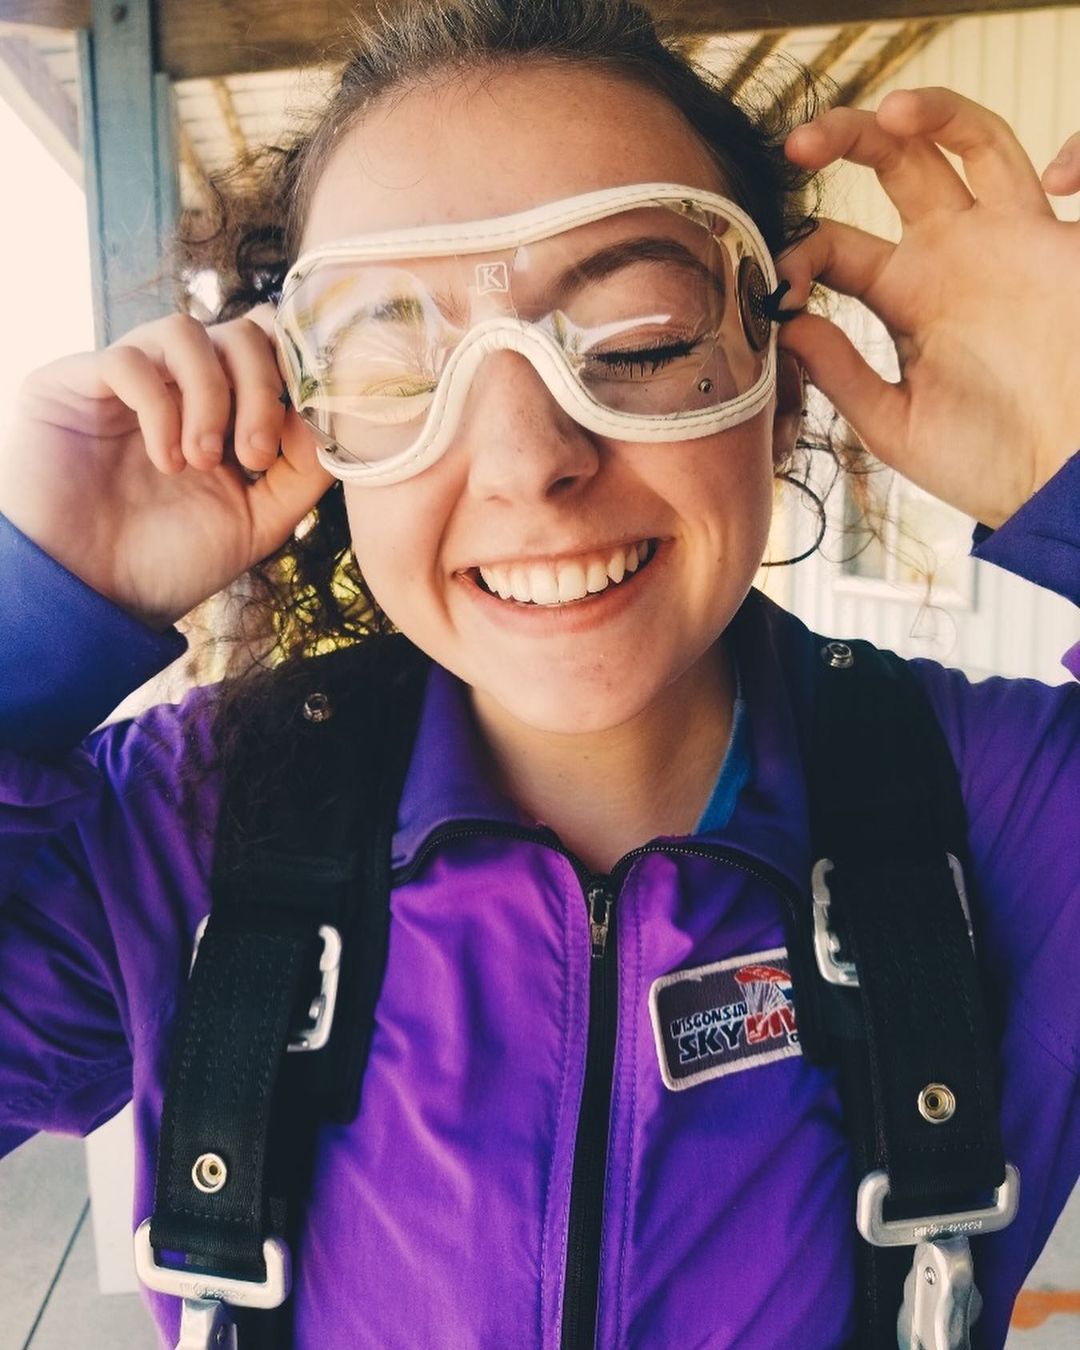 Girl smiling before a tandem skydive at Wisconsin Skydiving Center near Chicago